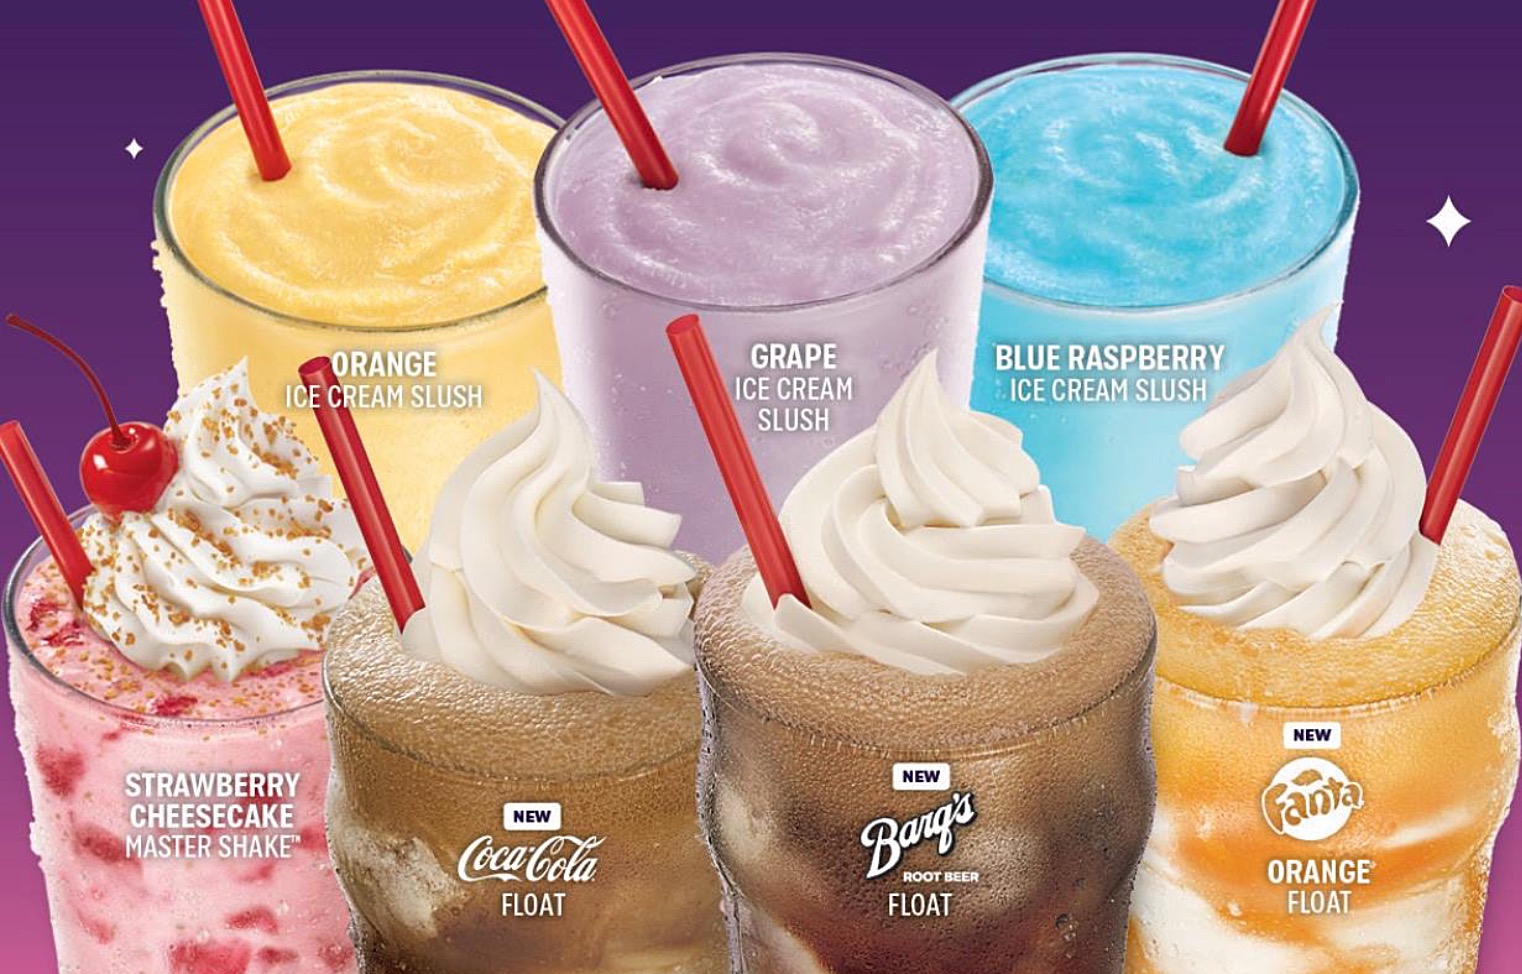 Sonic | After 8PM All Shakes, Ice Cream Slushes, & Floats 1/2 Price | Ship Saves